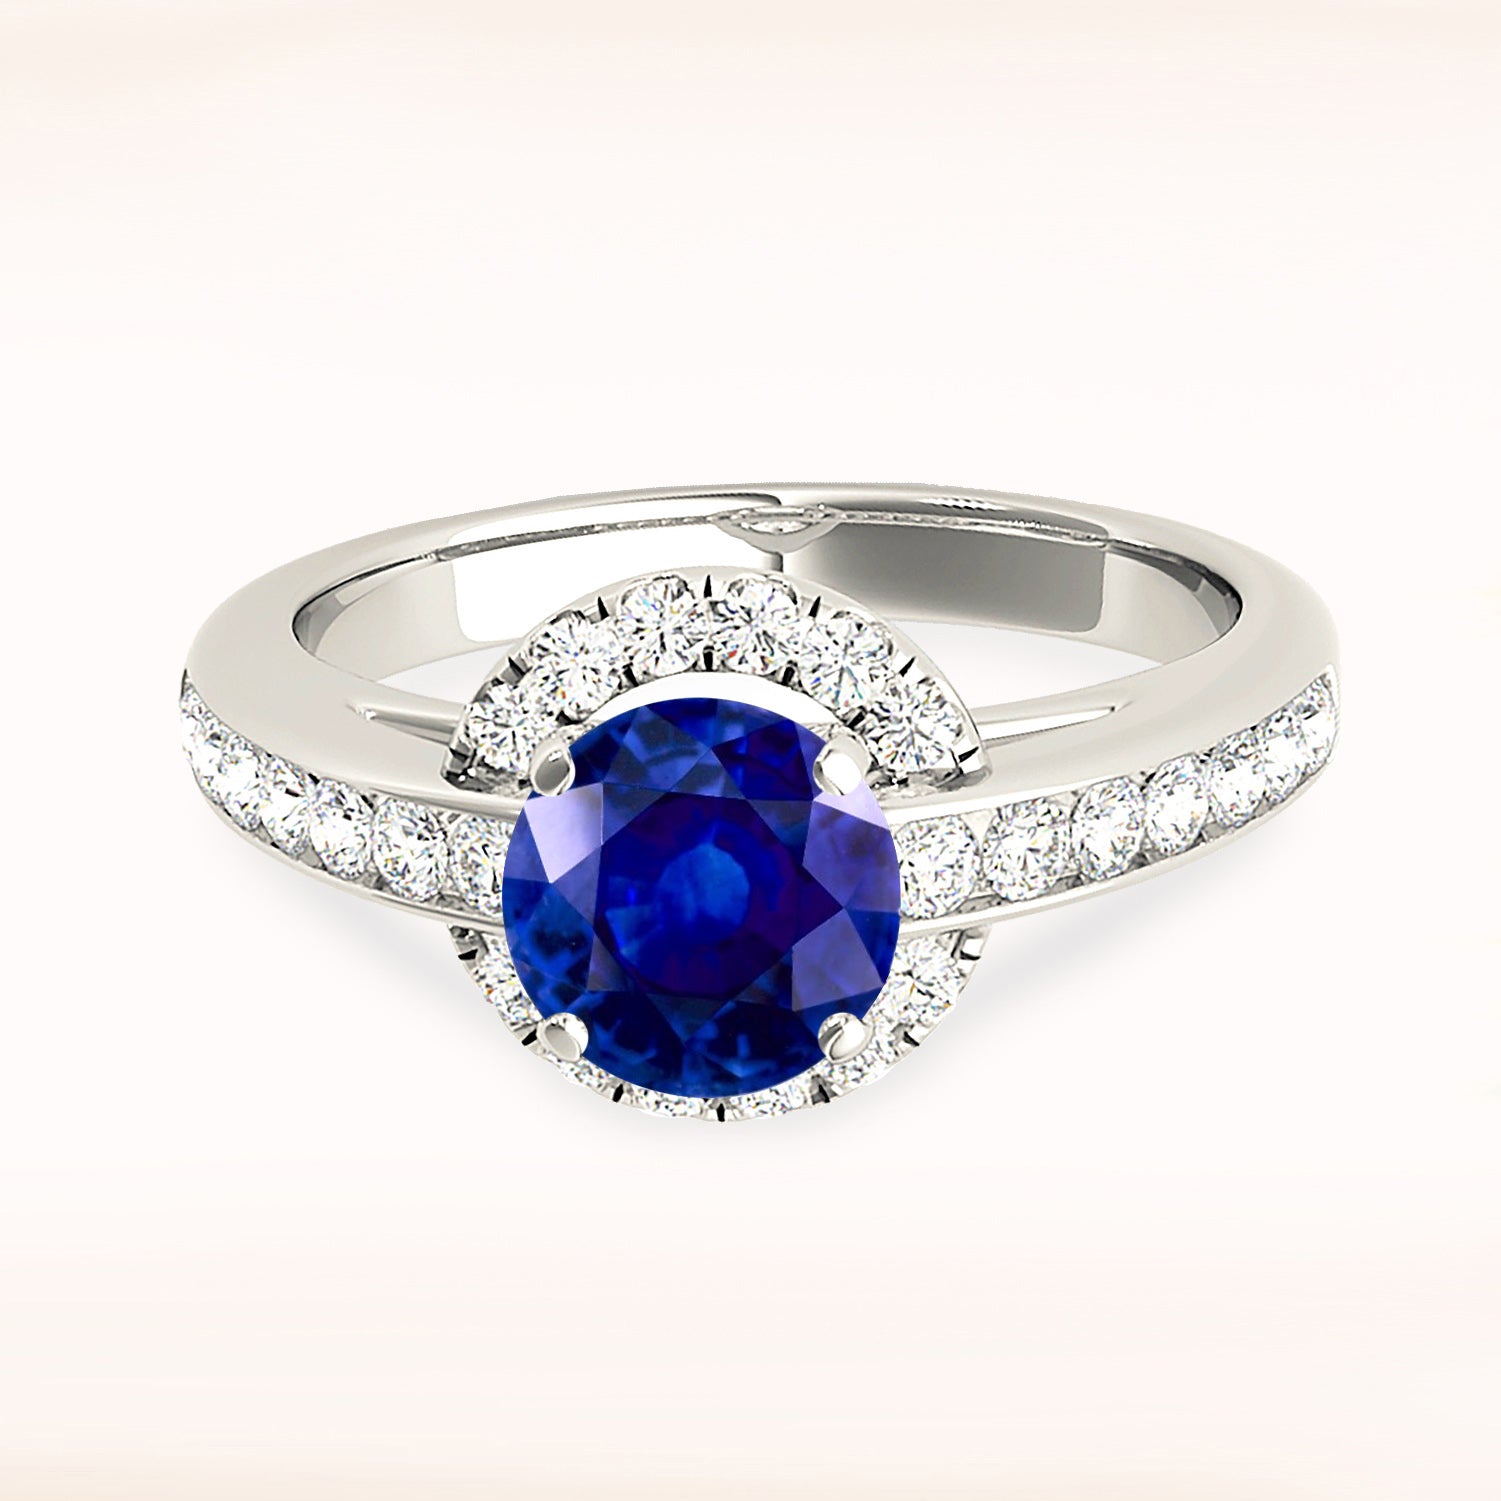 1.80 ct. Genuine Blue Sapphire Ring With 0.40 ctw. Diamond Underneath Halo, Cathedral Style Diamond Band | Natural Blue Sapphire Halo Ring-in 14K/18K White, Yellow, Rose Gold and Platinum - Christmas Jewelry Gift -VIRABYANI